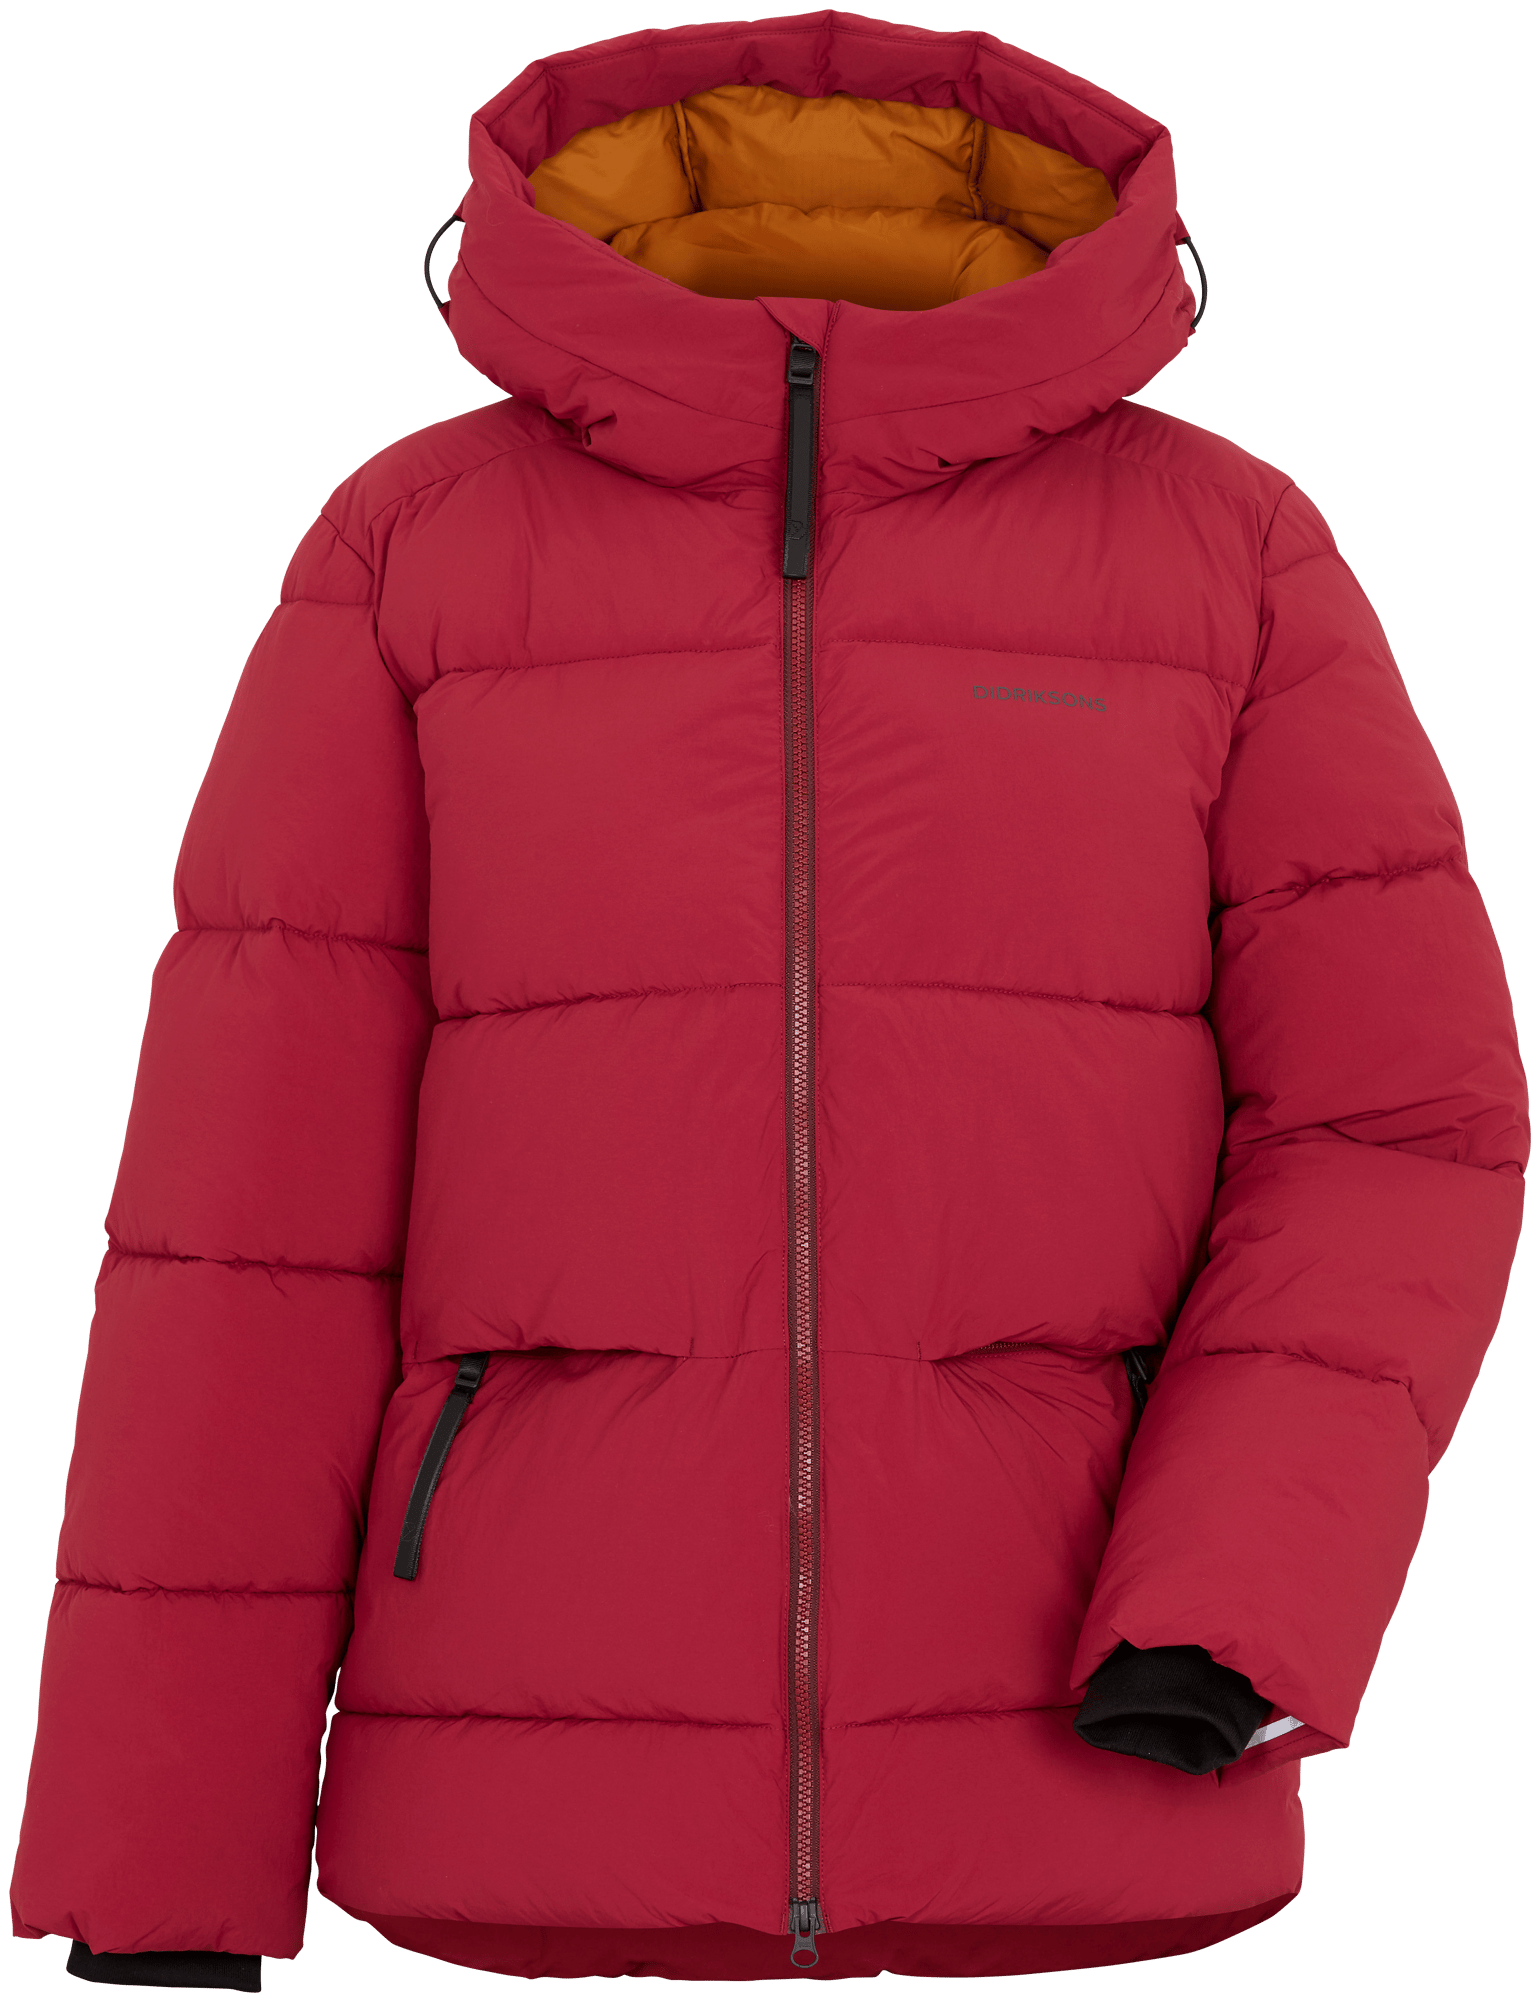 Didriksons Nomi Women's Jacket 2 Ruby Red